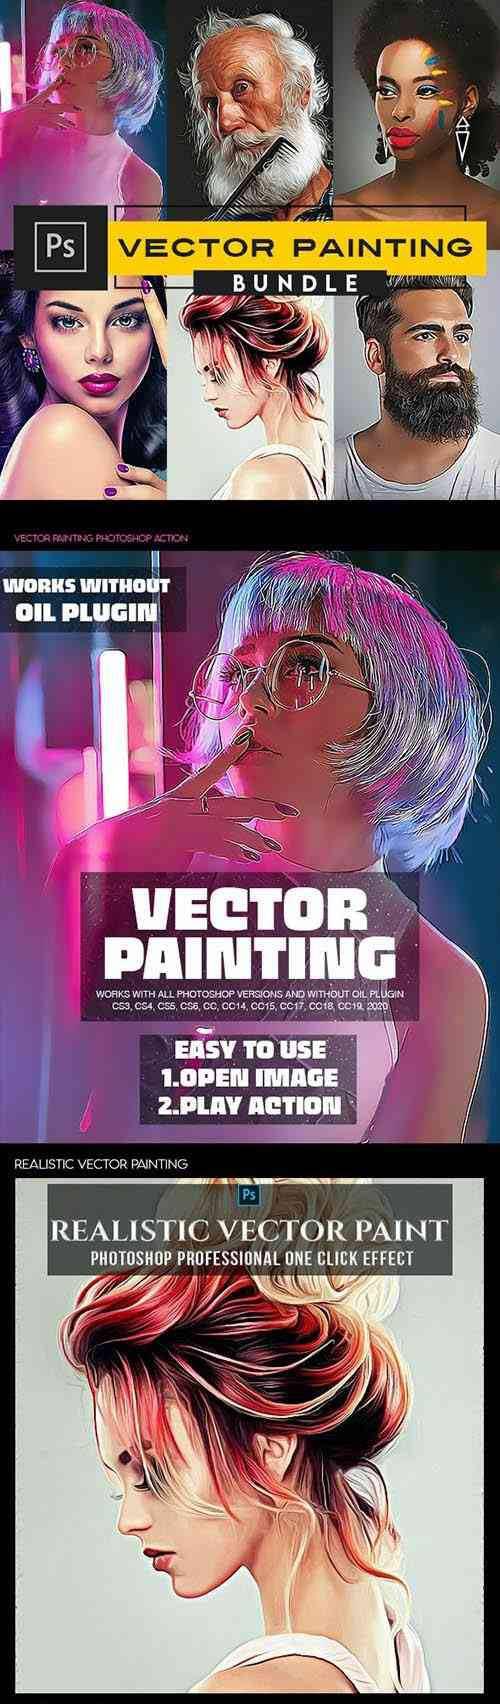 Vector Painting Photoshop Actions 27982210